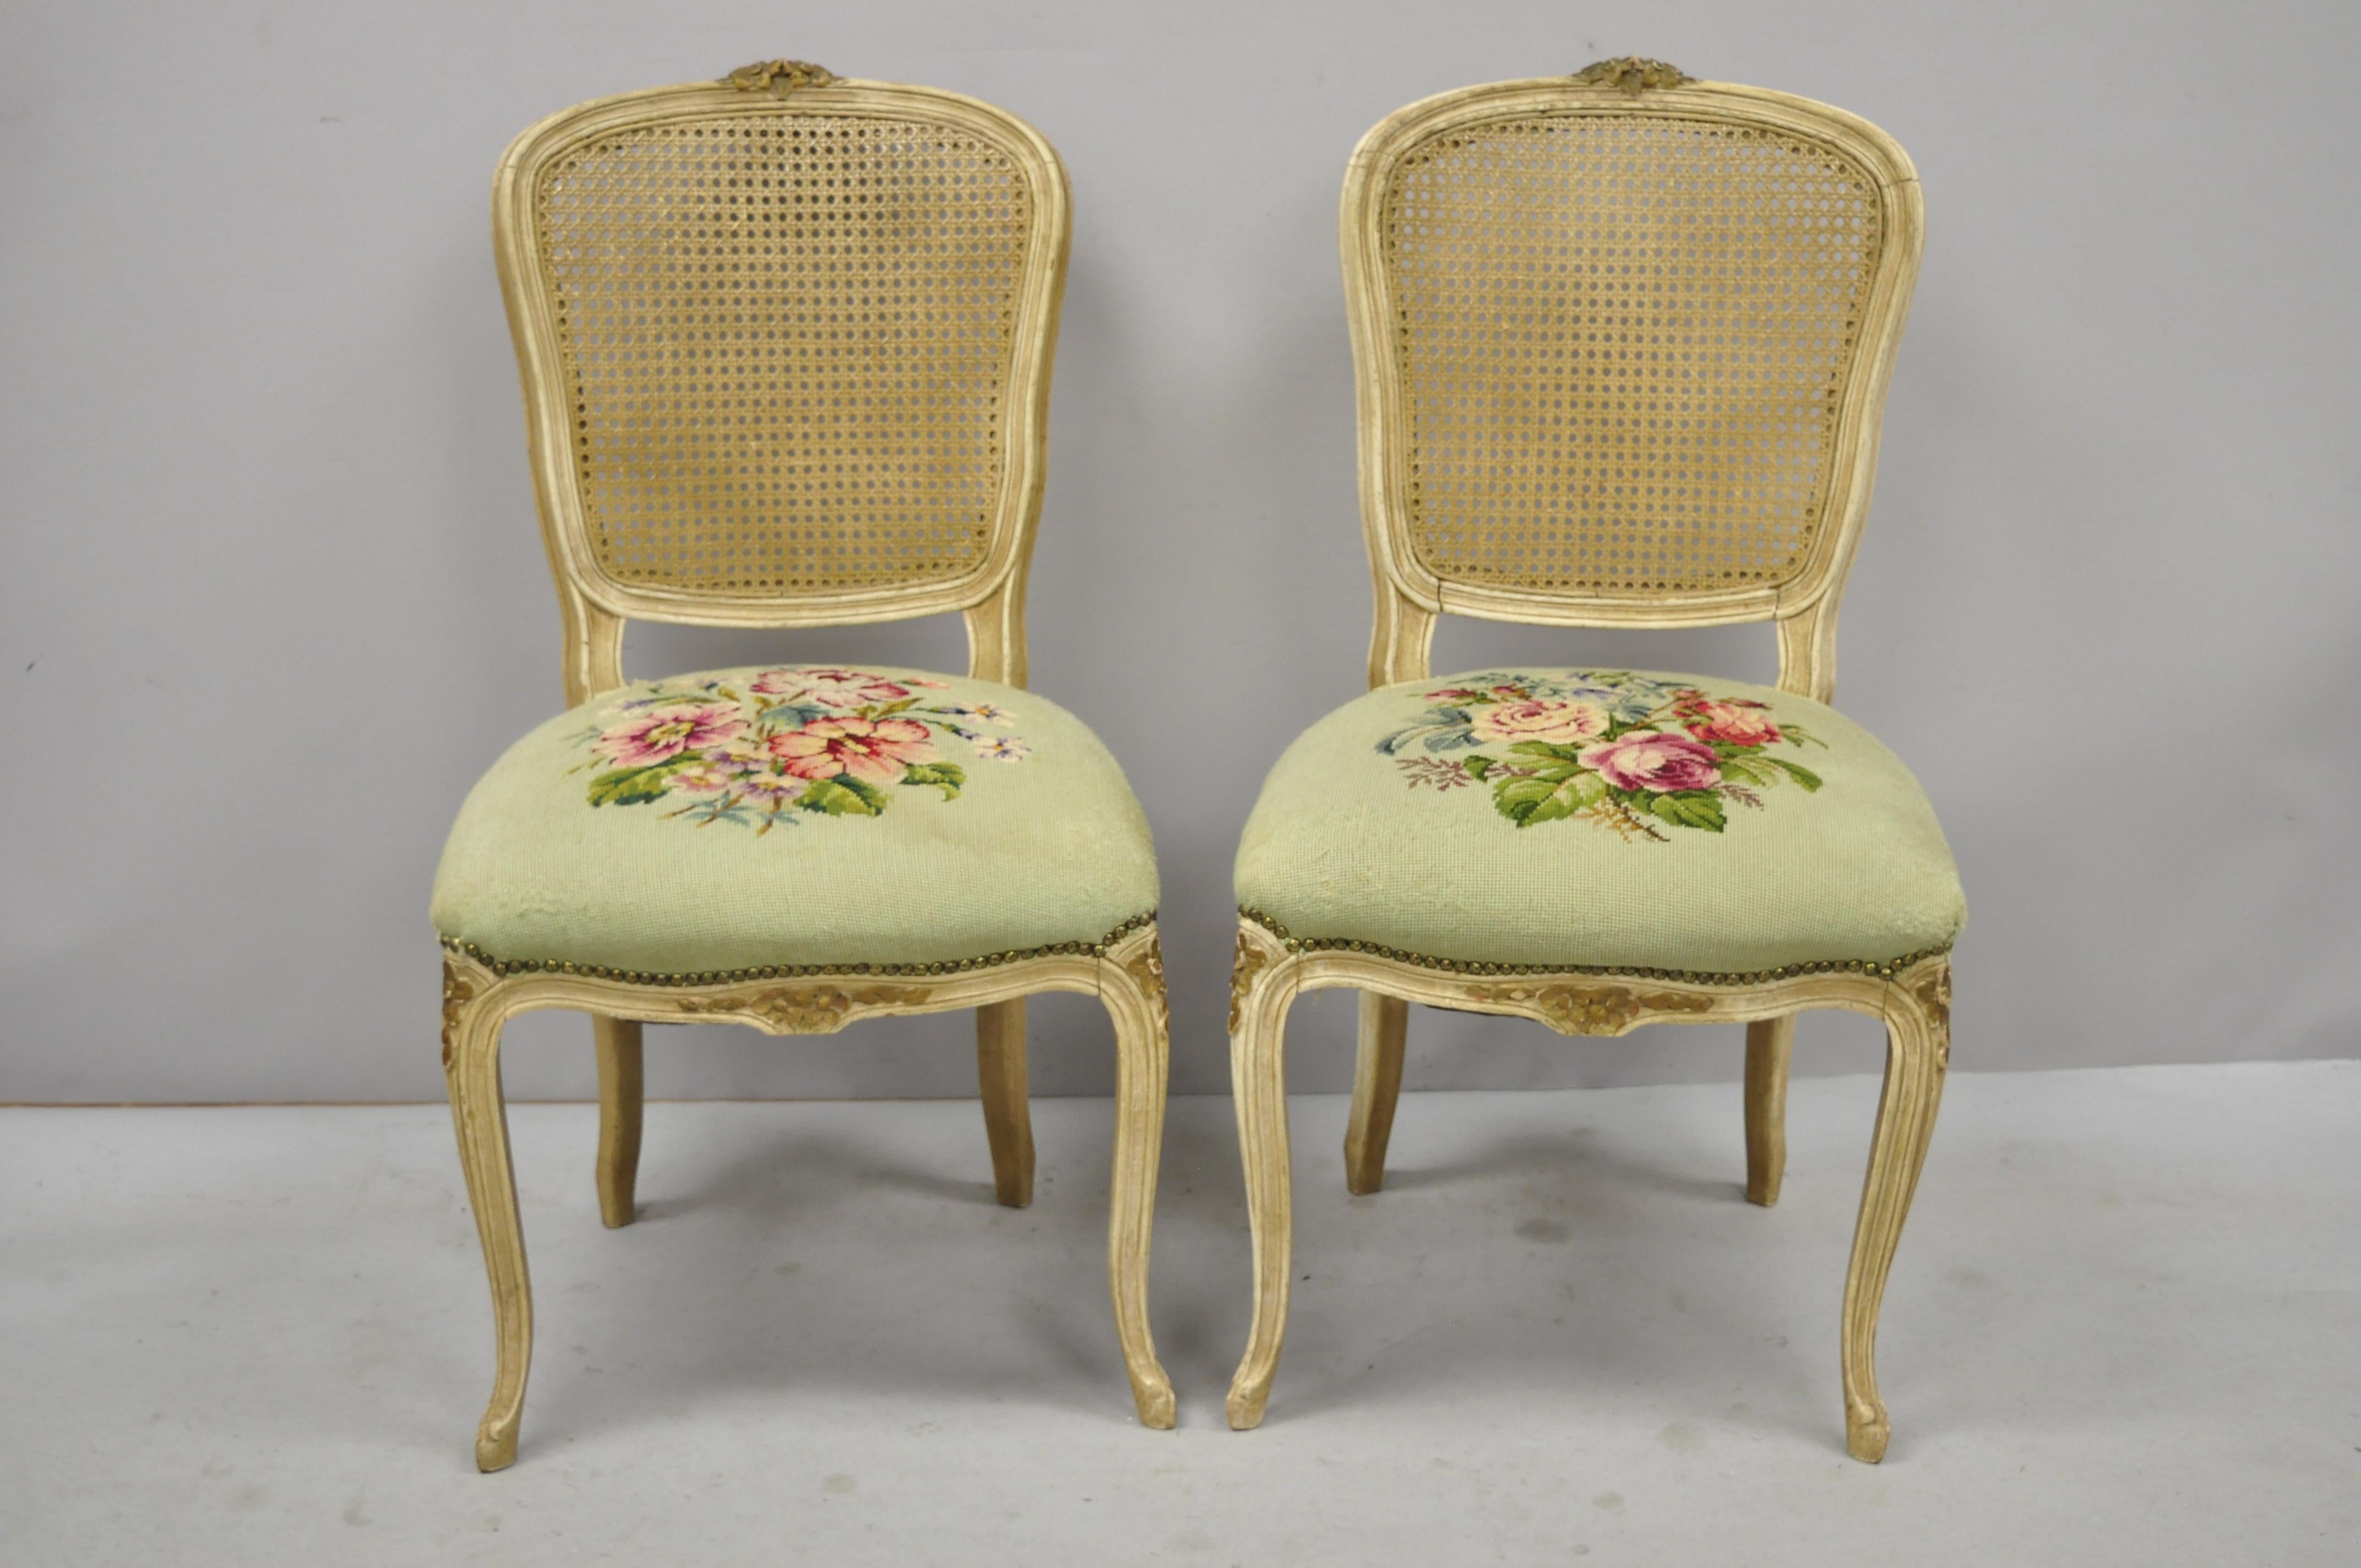 Set of 6 antique French Louis XV style Victorian cane back dining side chairs. Listing includes cane backs, floral needlepoint seats, solid wood frame, cream distressed finish, nicely carved details, cabriole legs, circa early 20th century.